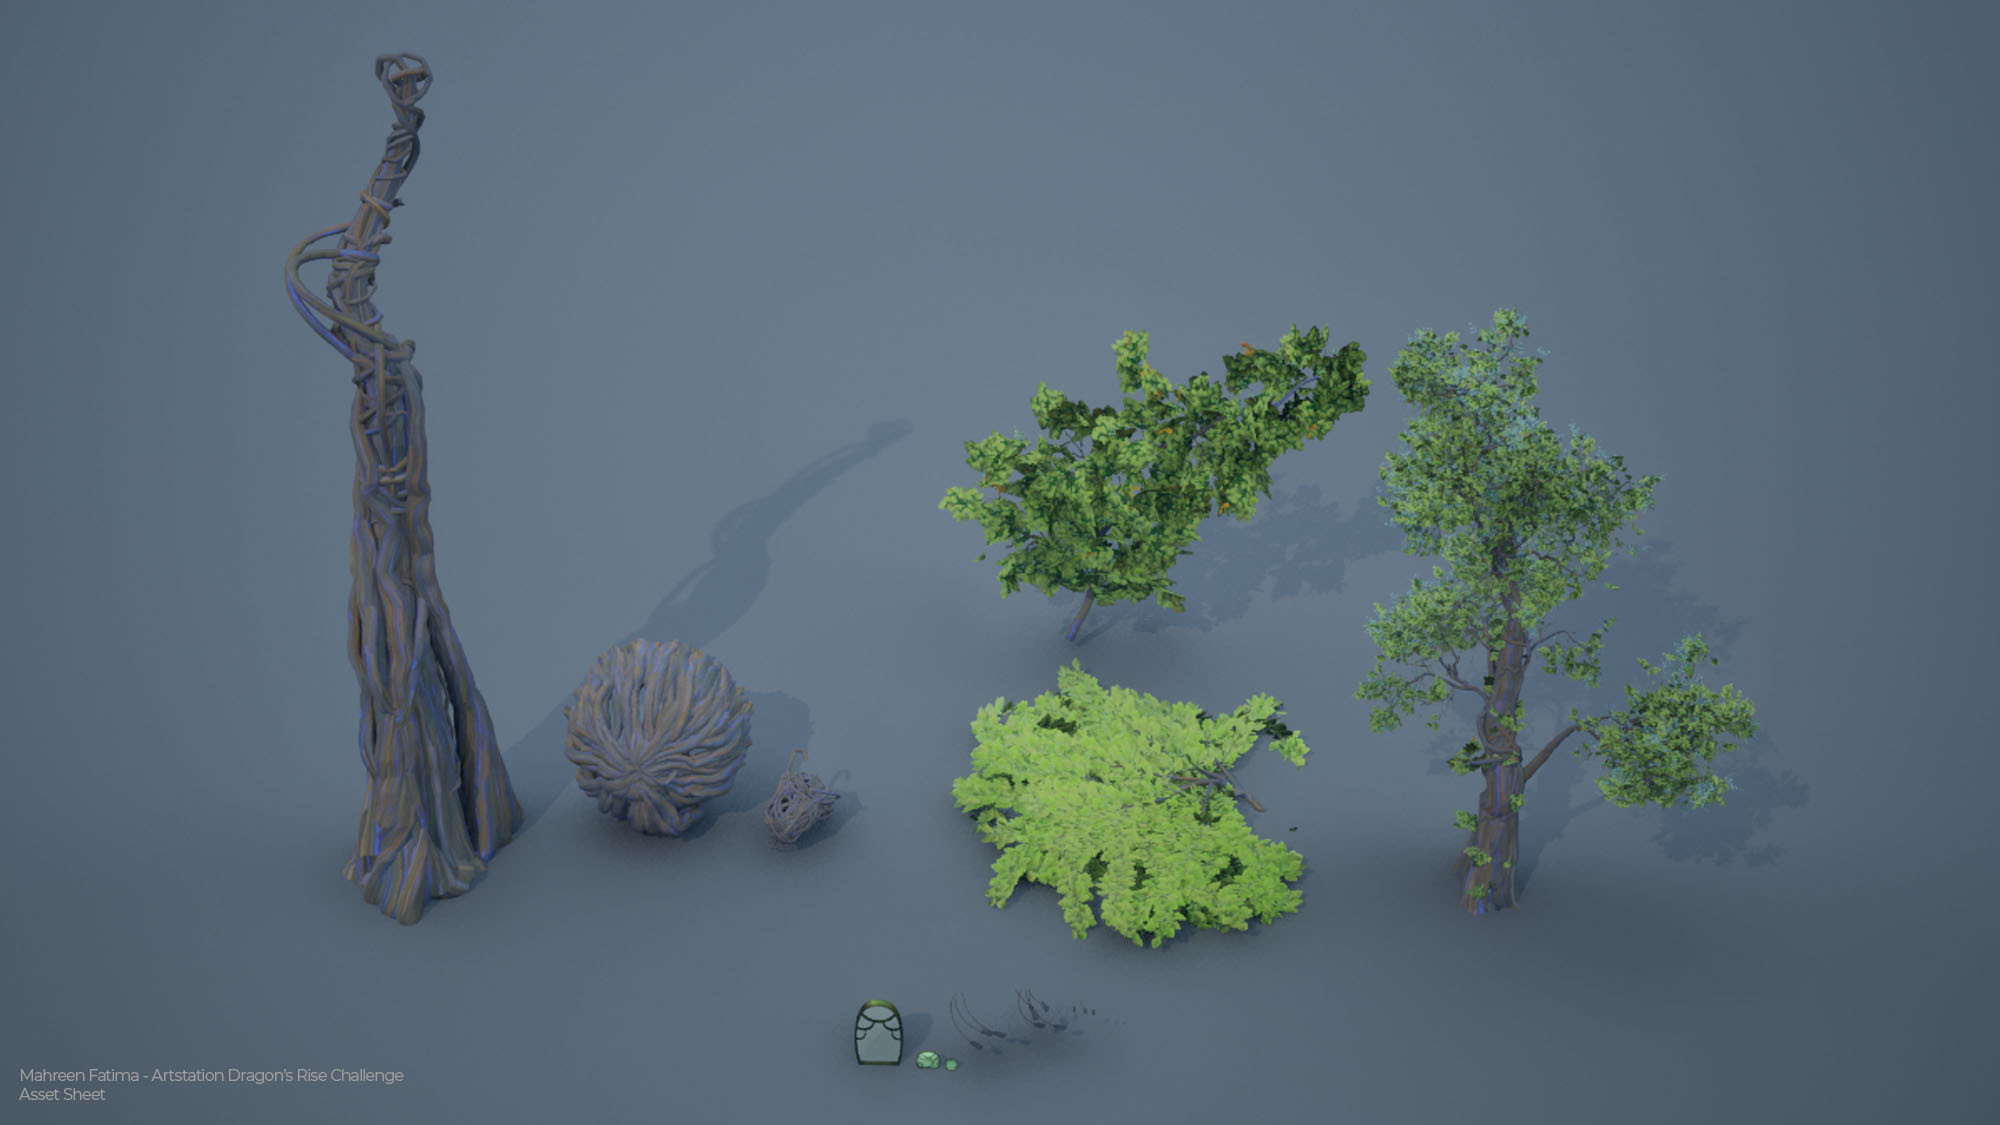 All assets in same sheet to demonstrate scale of foliage assets. Details in smaller assets were minimalized due to the scale and amount of pixel space these assets would need in final images. 